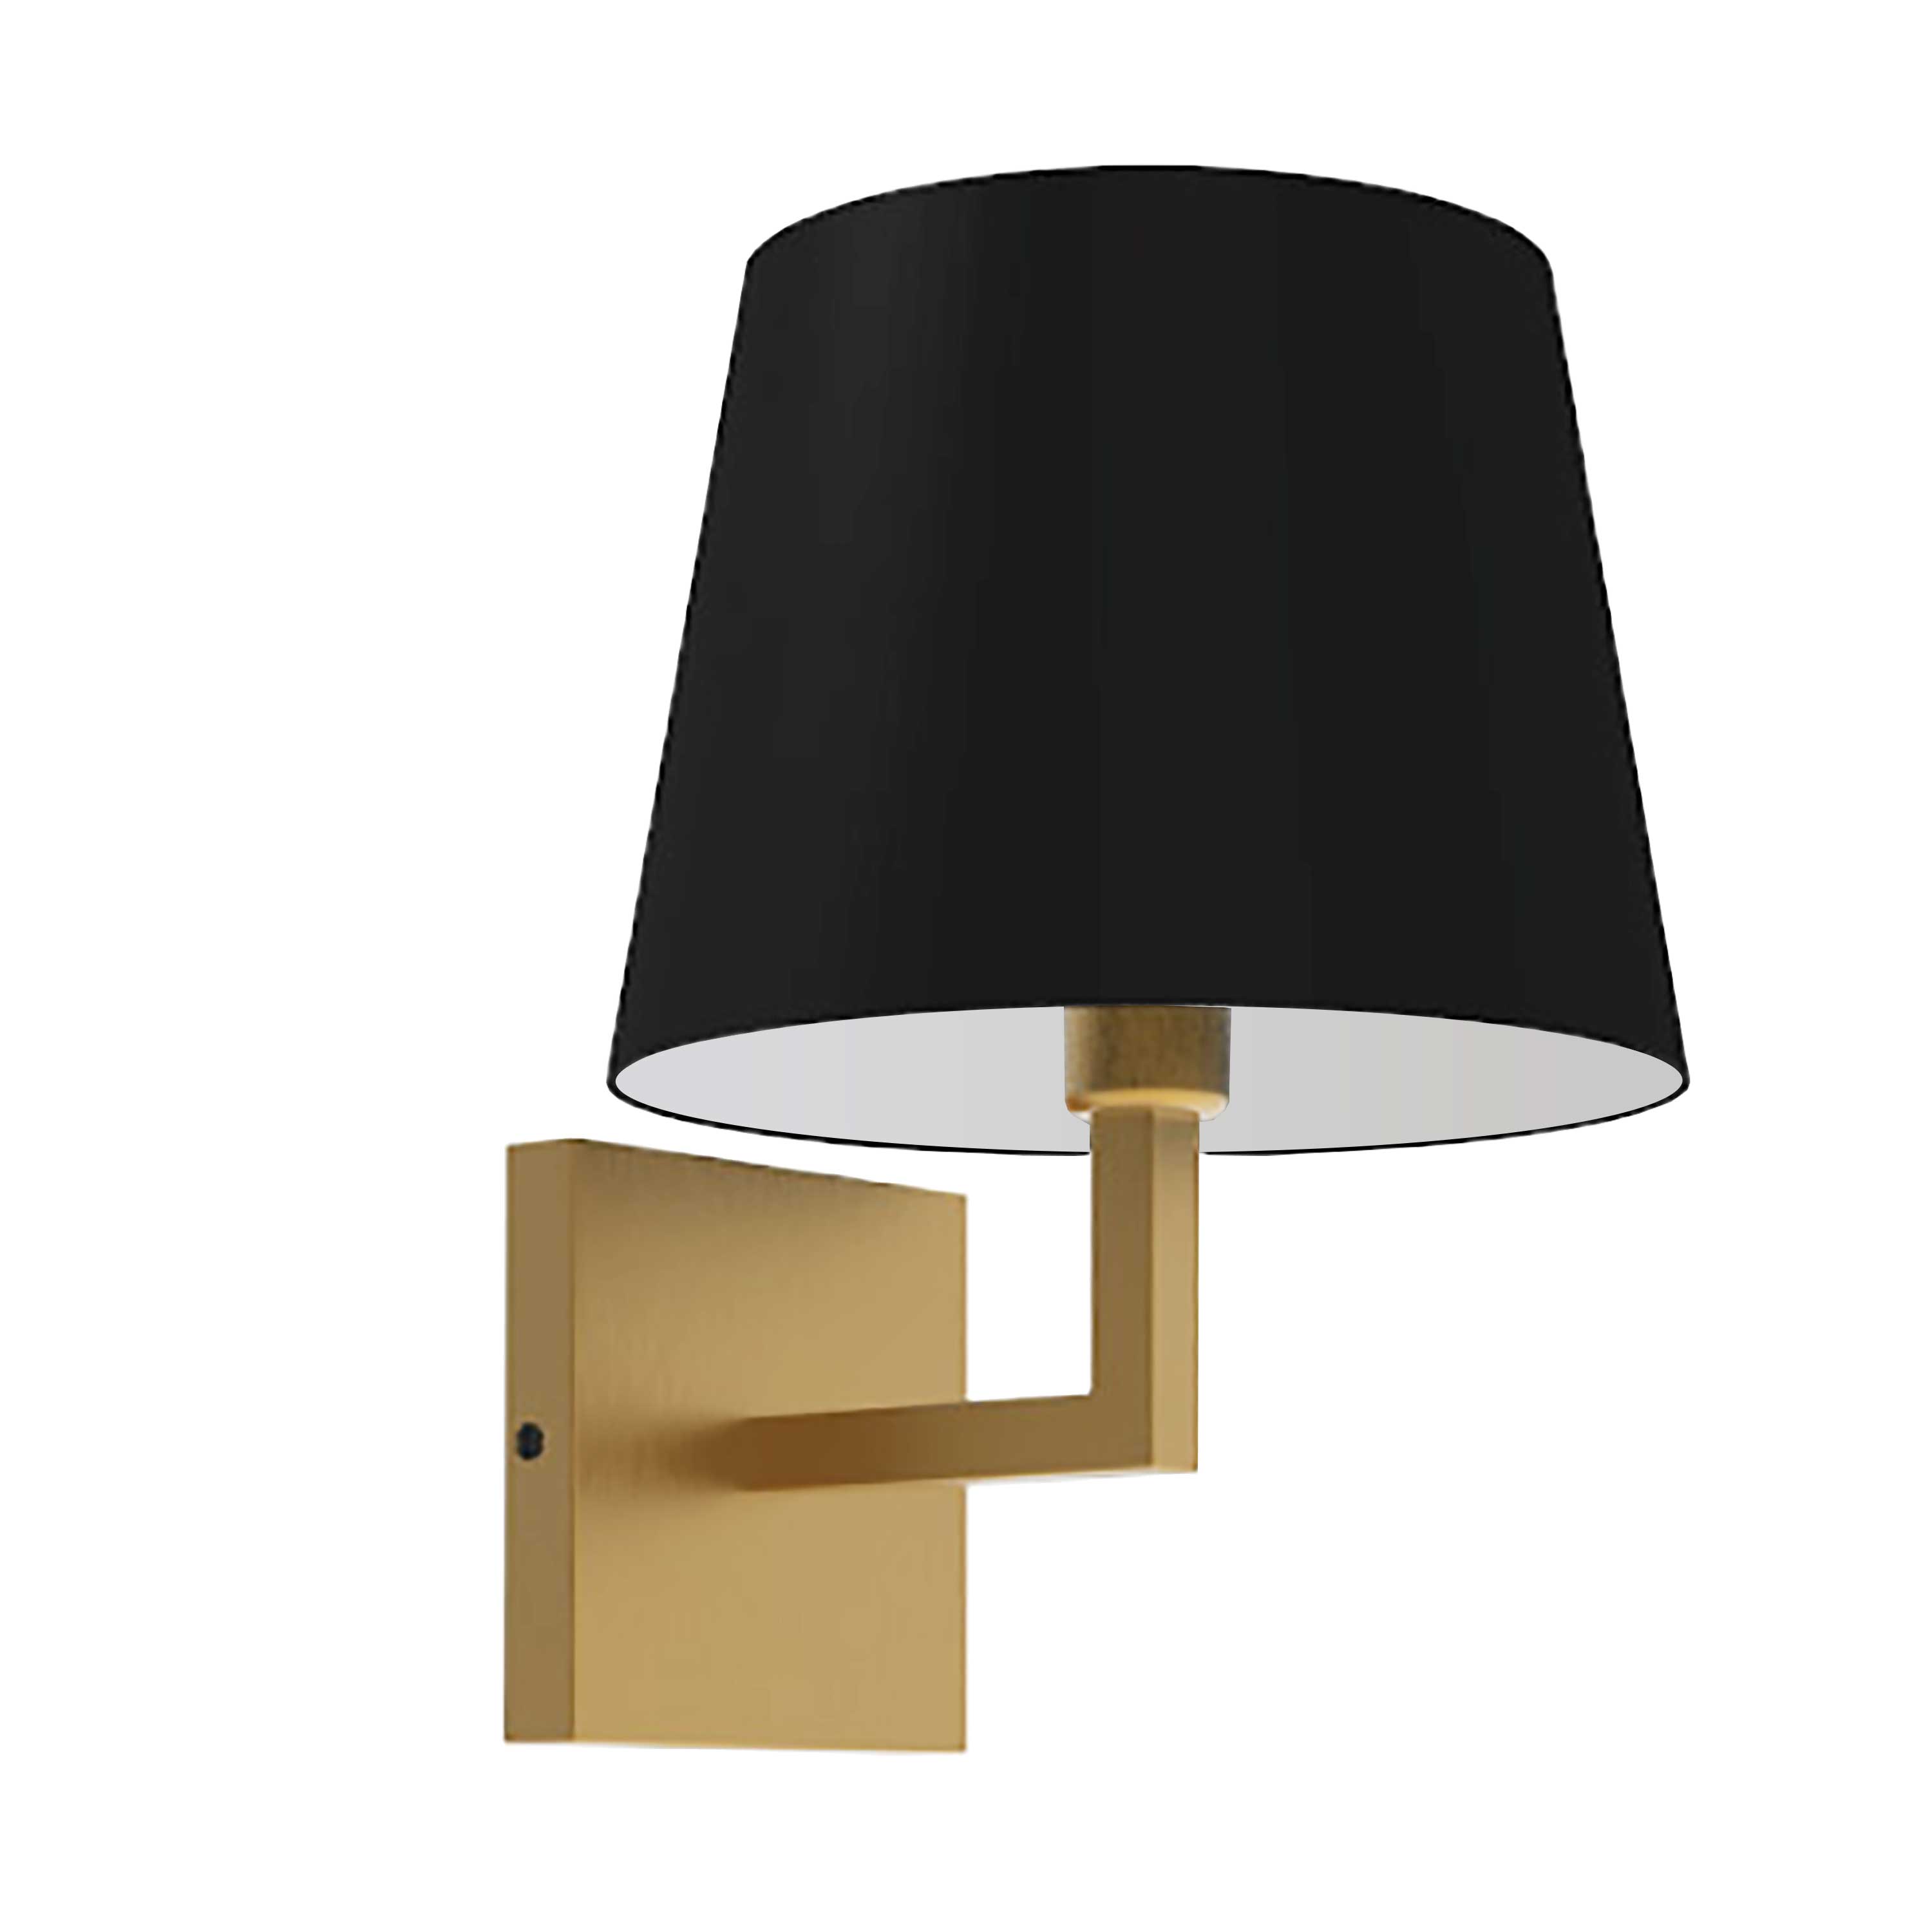 1 Light Incandescent Wall, Sconce Aged Brass with Black Shade